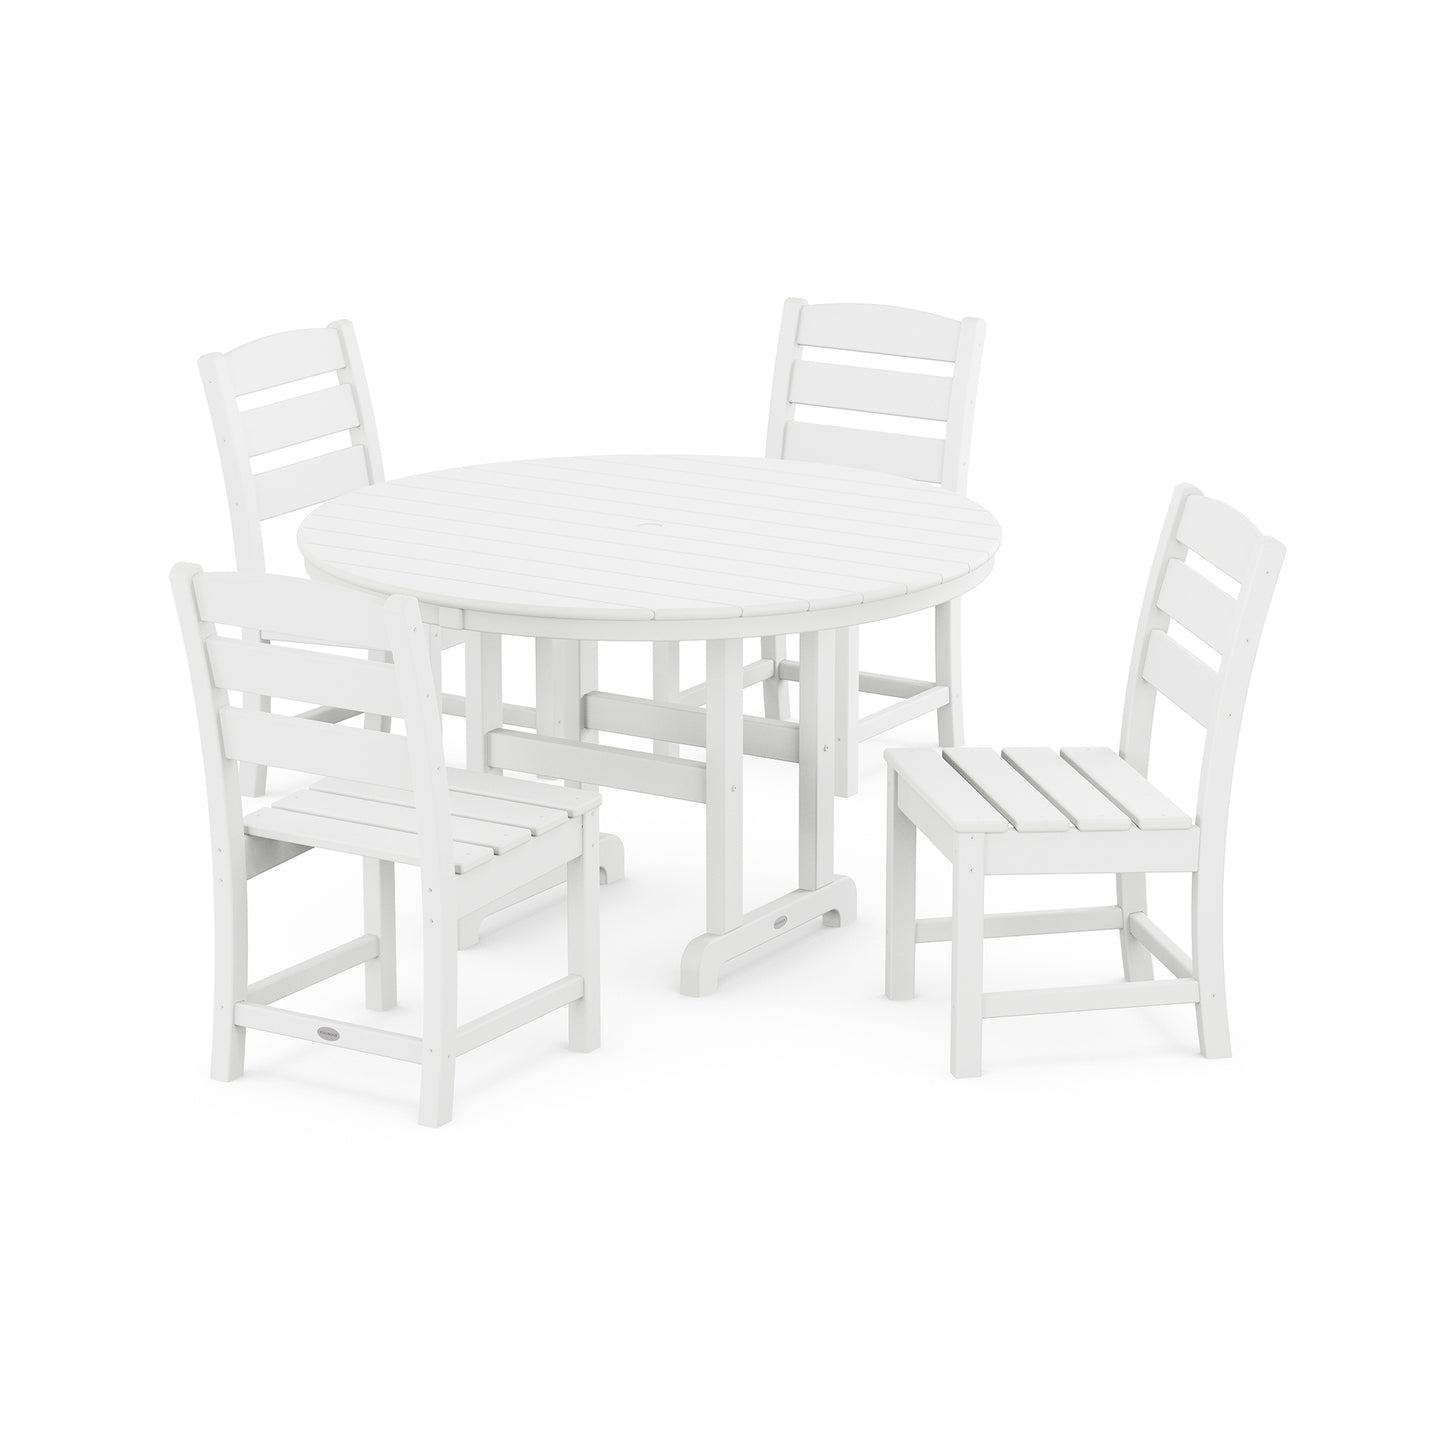 A white round outdoor dining table with four matching POLYWOOD Lakeside side chairs, all made of weather-resistant POLYWOOD® and arranged on a plain white background. The furniture set is simple and modern.